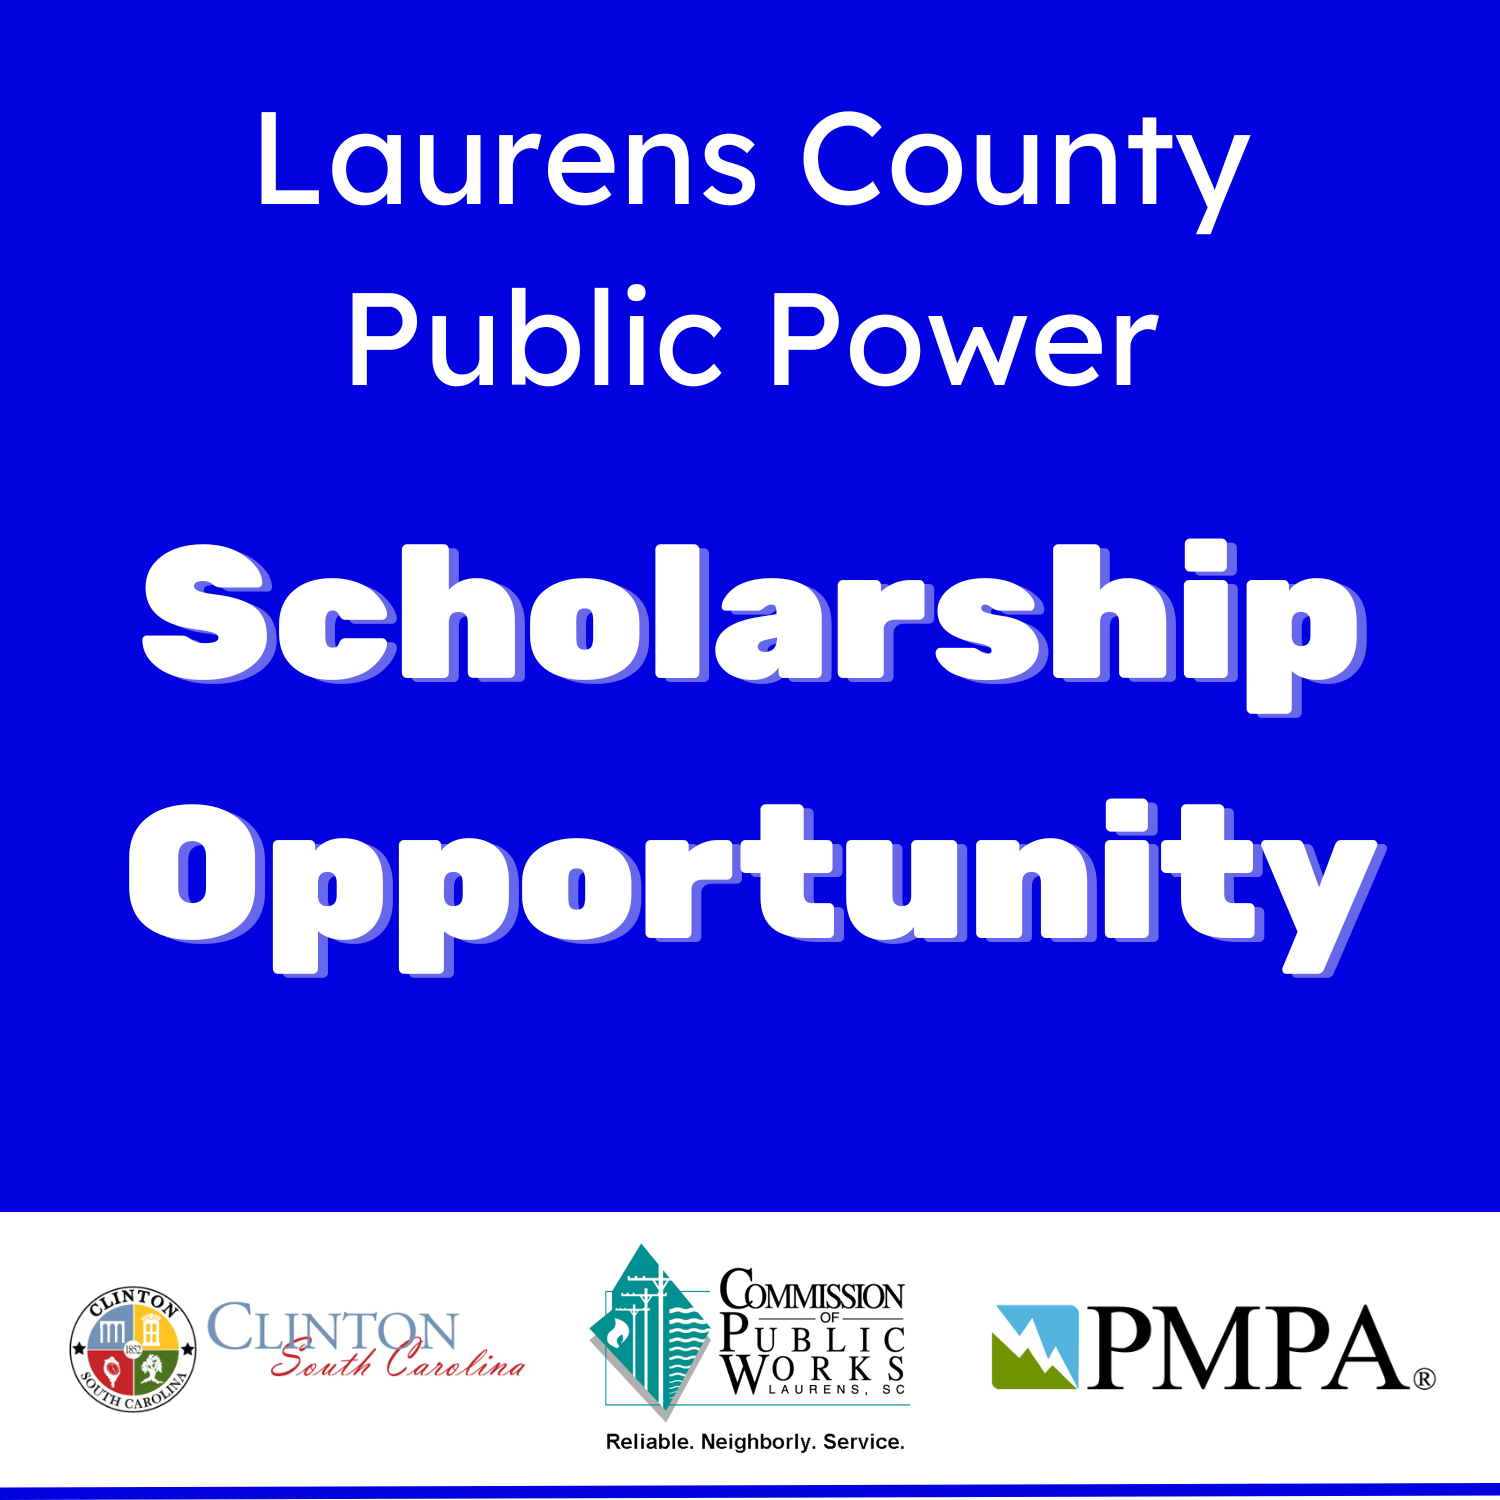 Laurens County Public Power Scholarship Opportunity